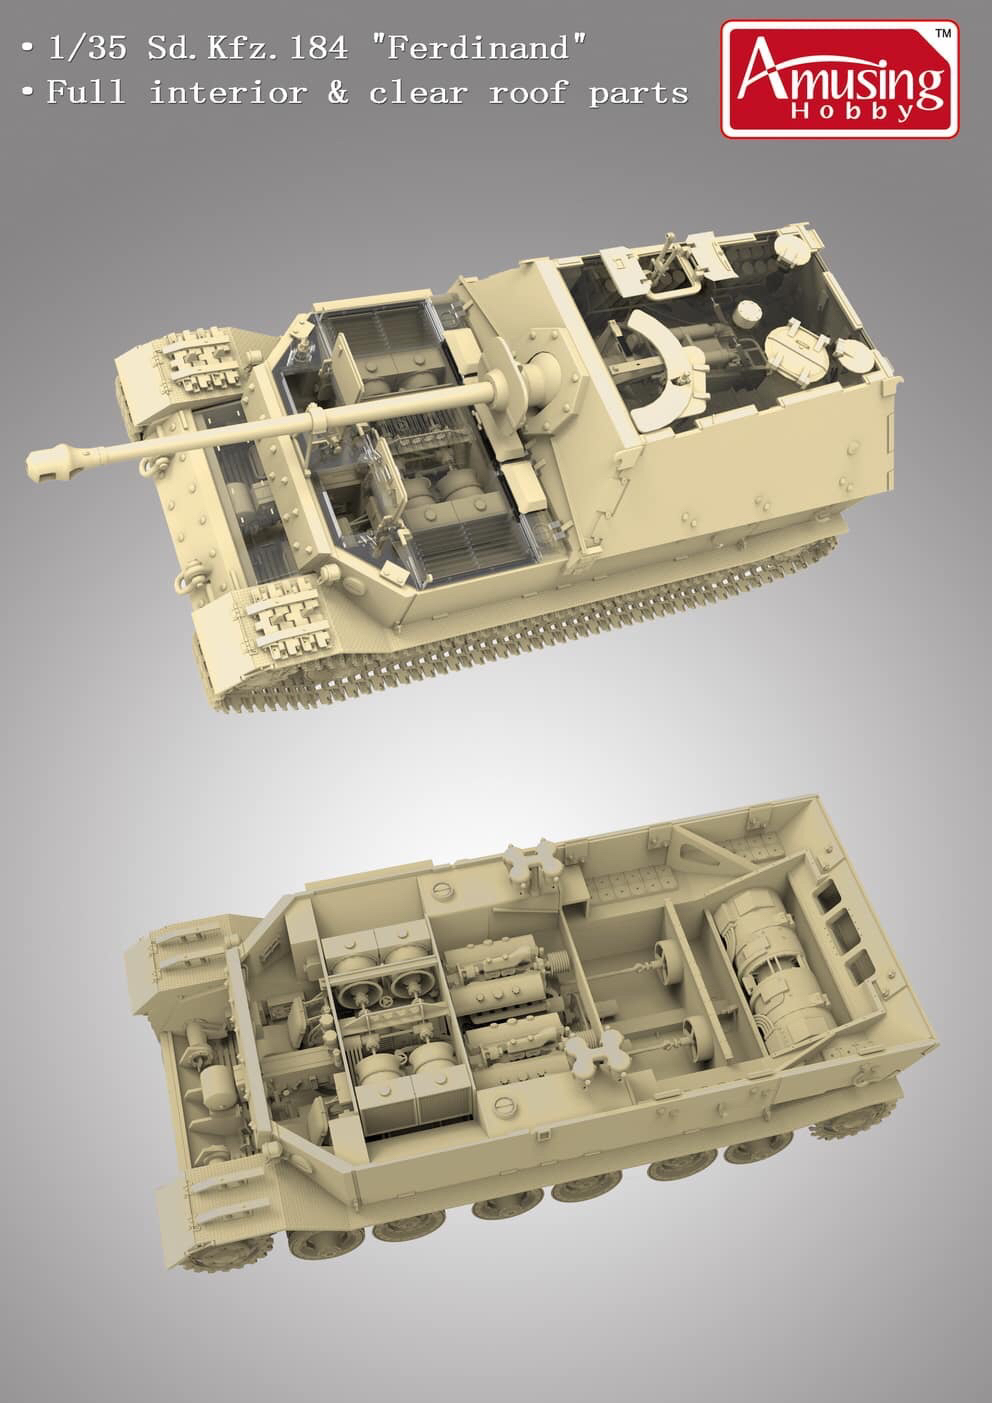 Amusing Hobby 35A030 1:35 Sd.Kfz.184 Ferdinand and 16t Strabokran Military Toy Kit for sale online 